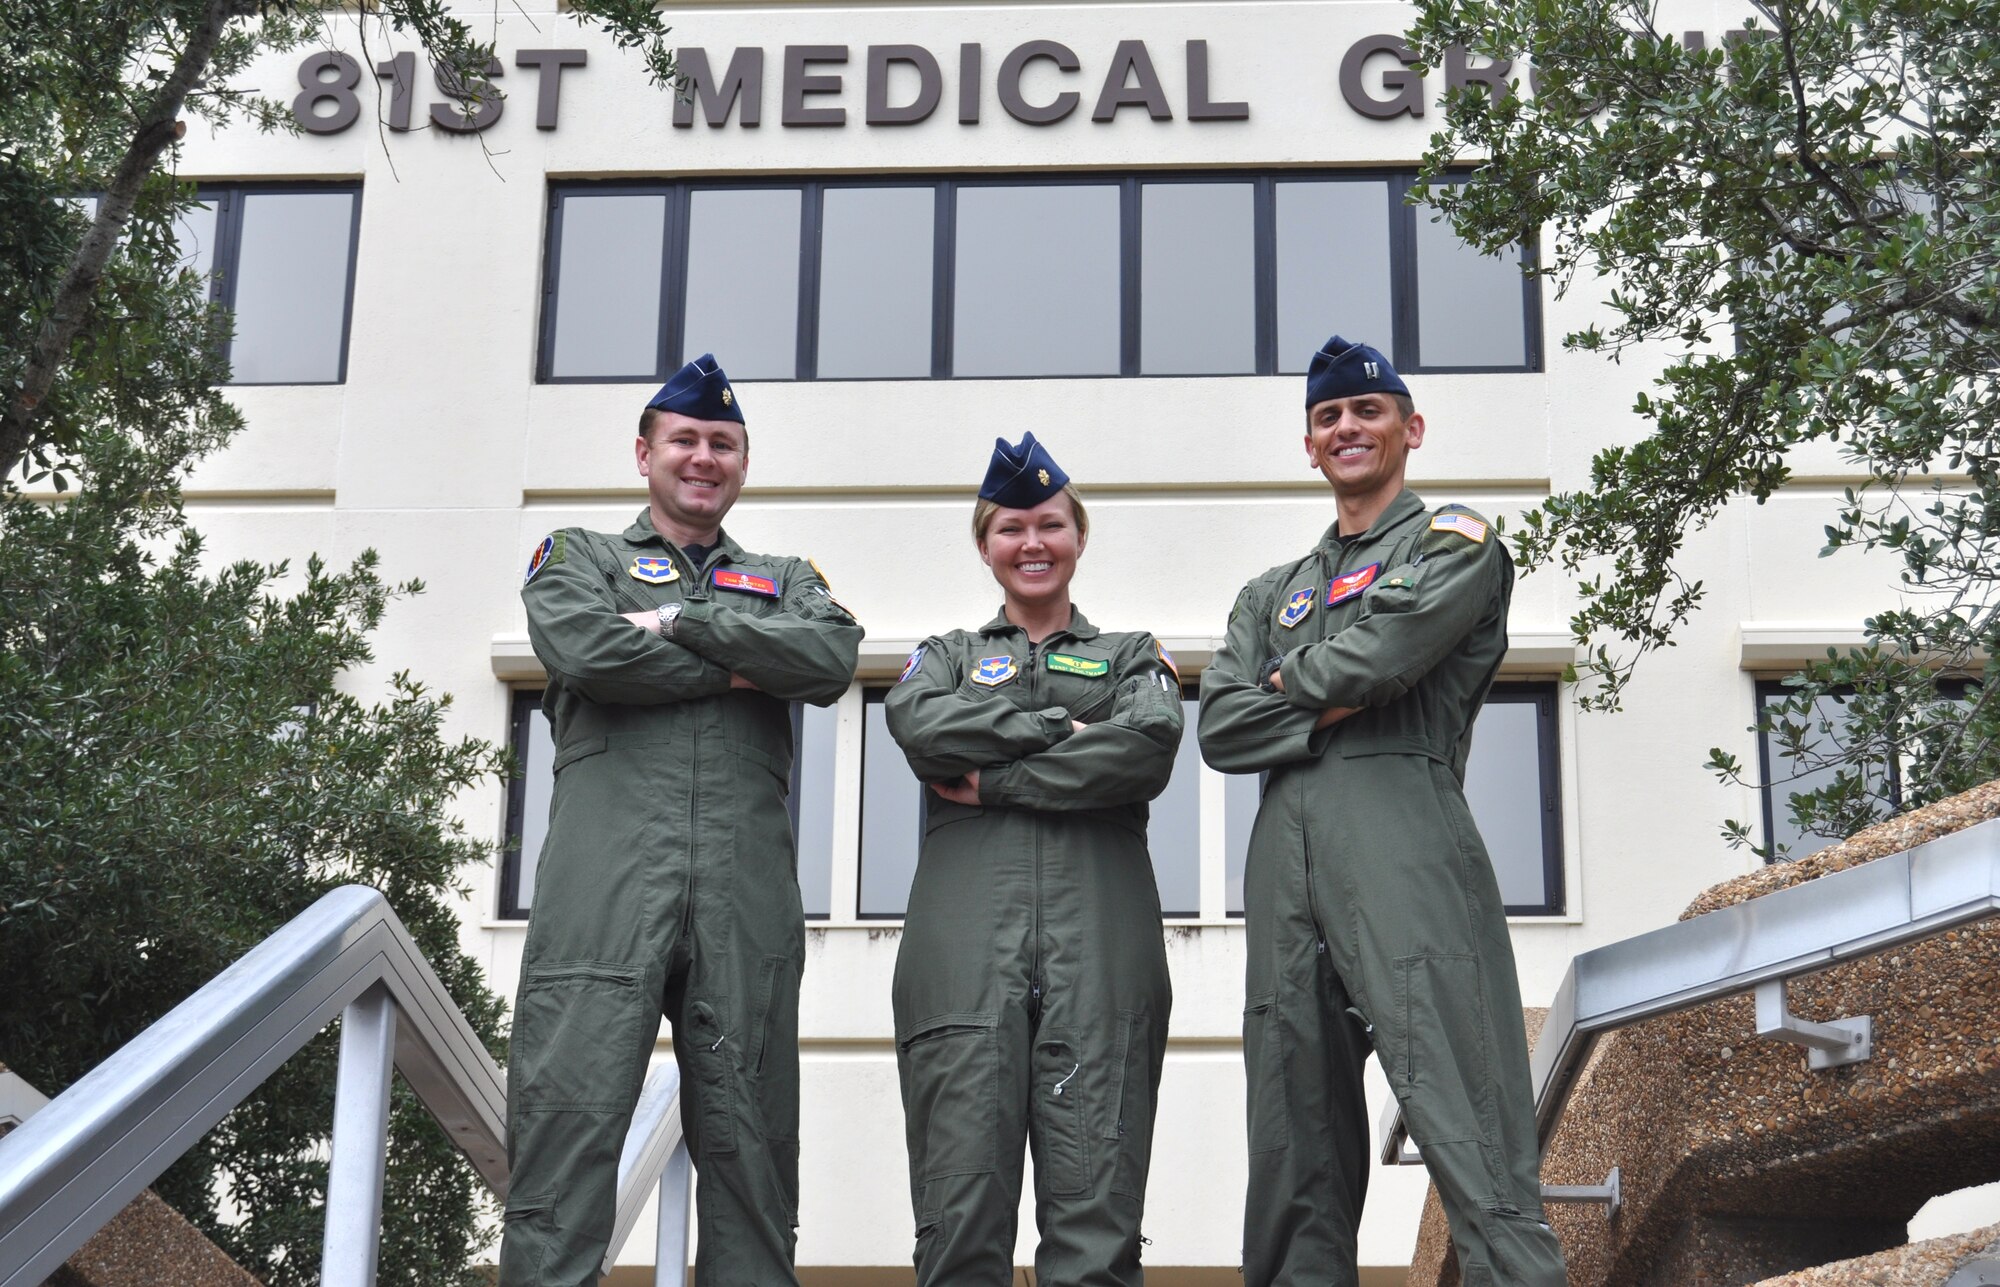 From left, Majs. (Drs.) Tom Paynter and Wendi Wohltmann and Capt. (Dr.) Robert Henley, Keesler flight surgeons, have been rotating through the 14th Medical Group medical facility at Columbus as part of Air Education and Training Command’s unique regional physician exchange program. Paynter is the 81st Surgical Operations Squadron’s chief of orthopedic surgery, Wohltmann is the 81st Medical Operations Squadron chief of dermatology and Henley is an 81st Aerospace Medicine Squadron flight surgeon who plans to train in ophthalmology in his next assignment.  (U.S. Air Force photo by Steve Pivnick)